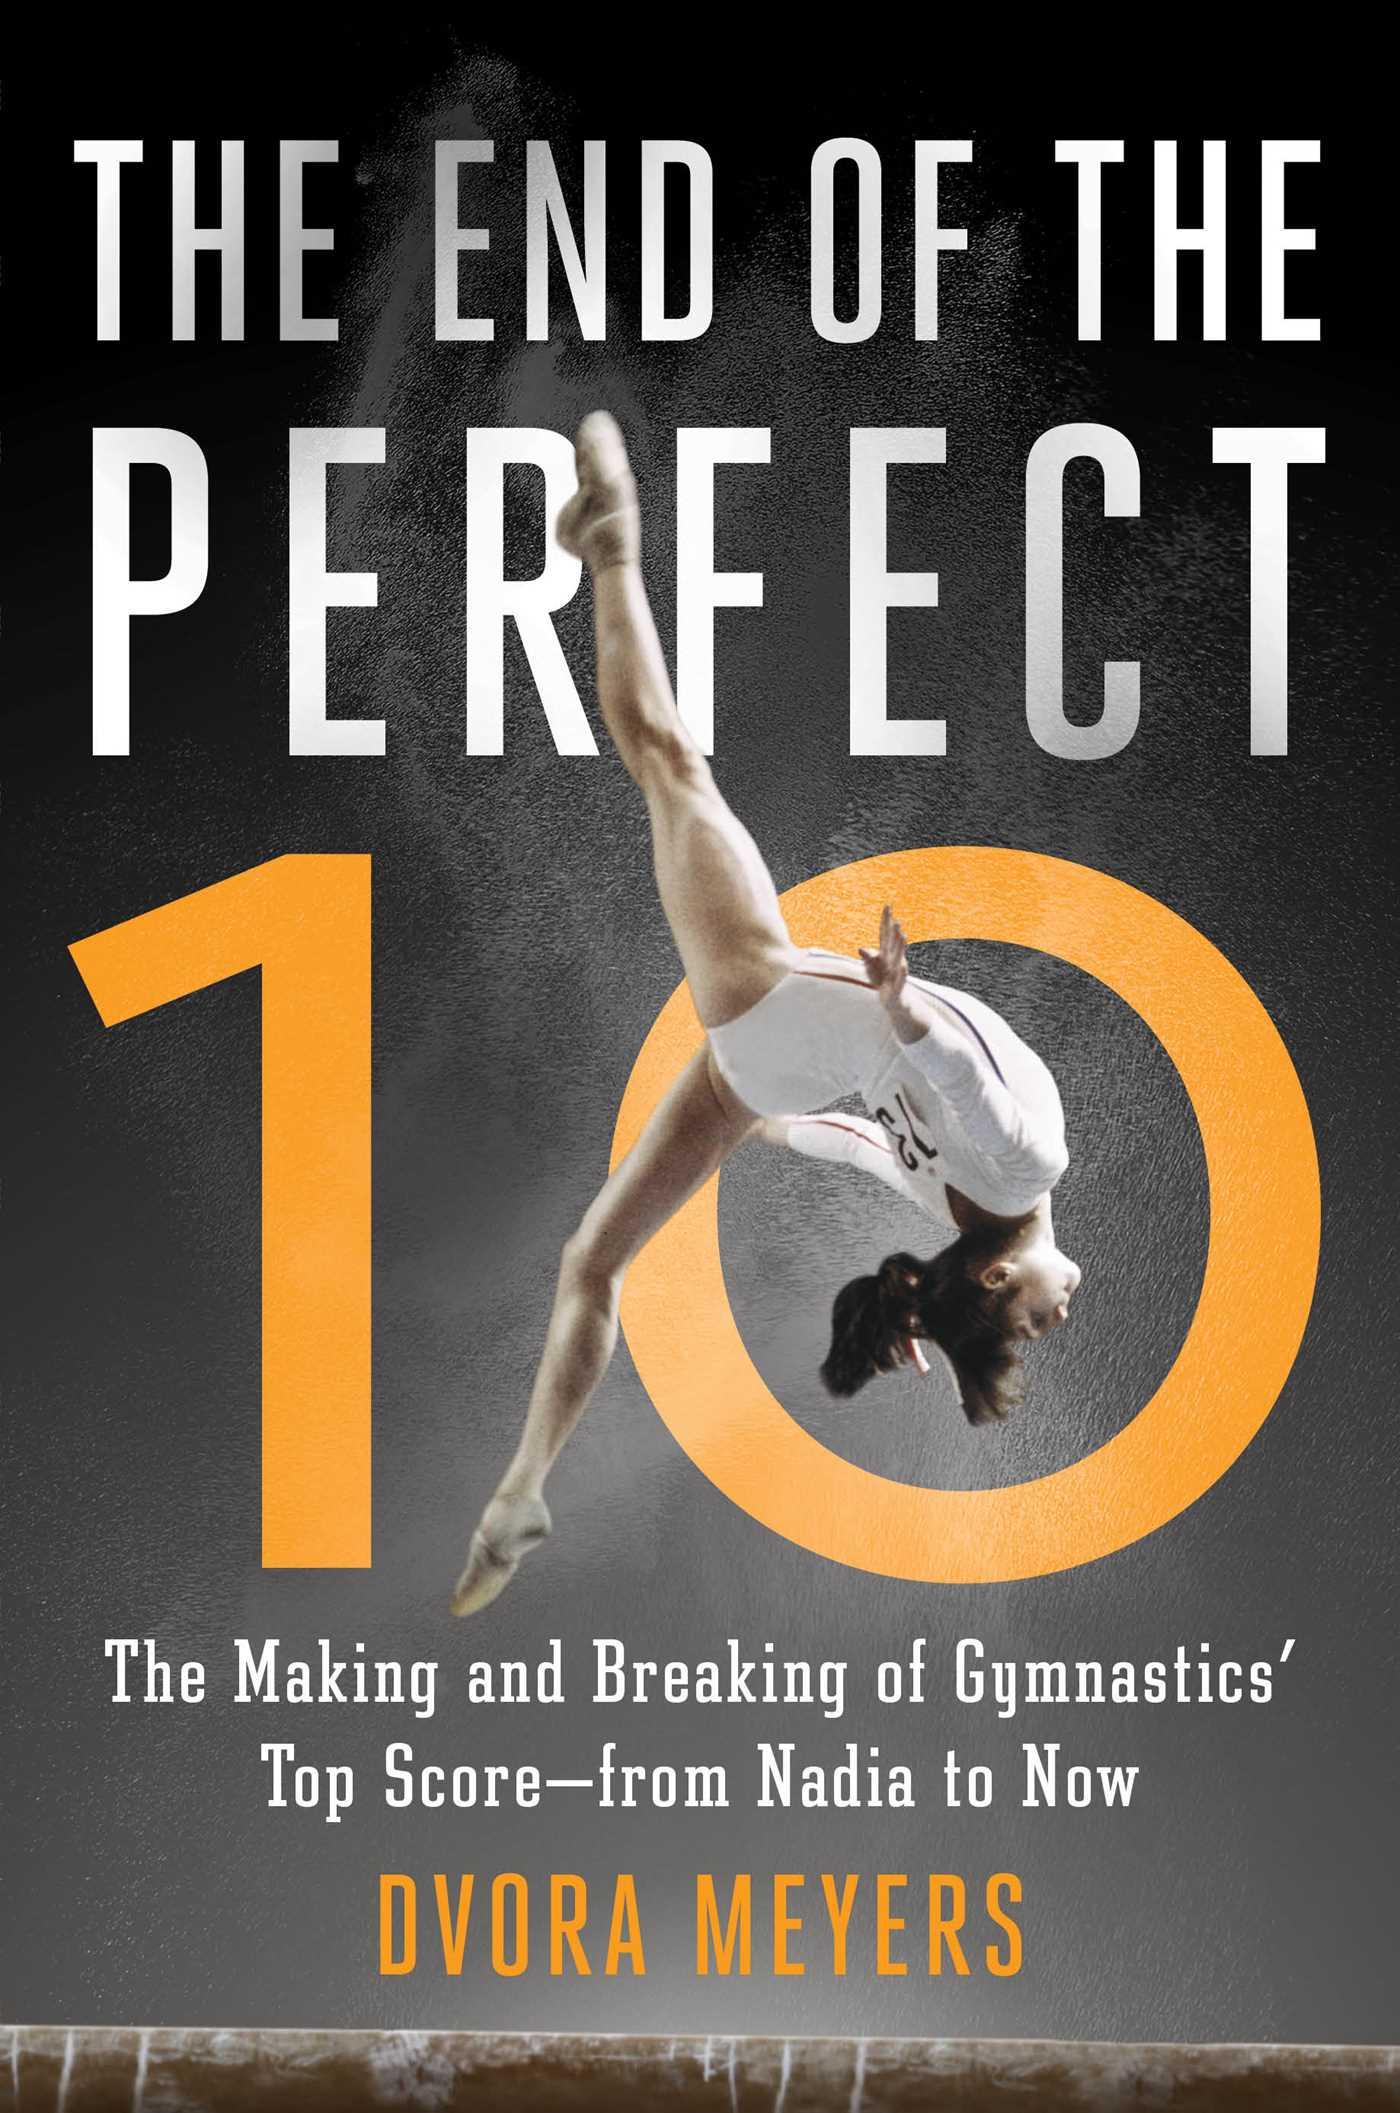 #1410: Is It The End Of The Perfect 10?